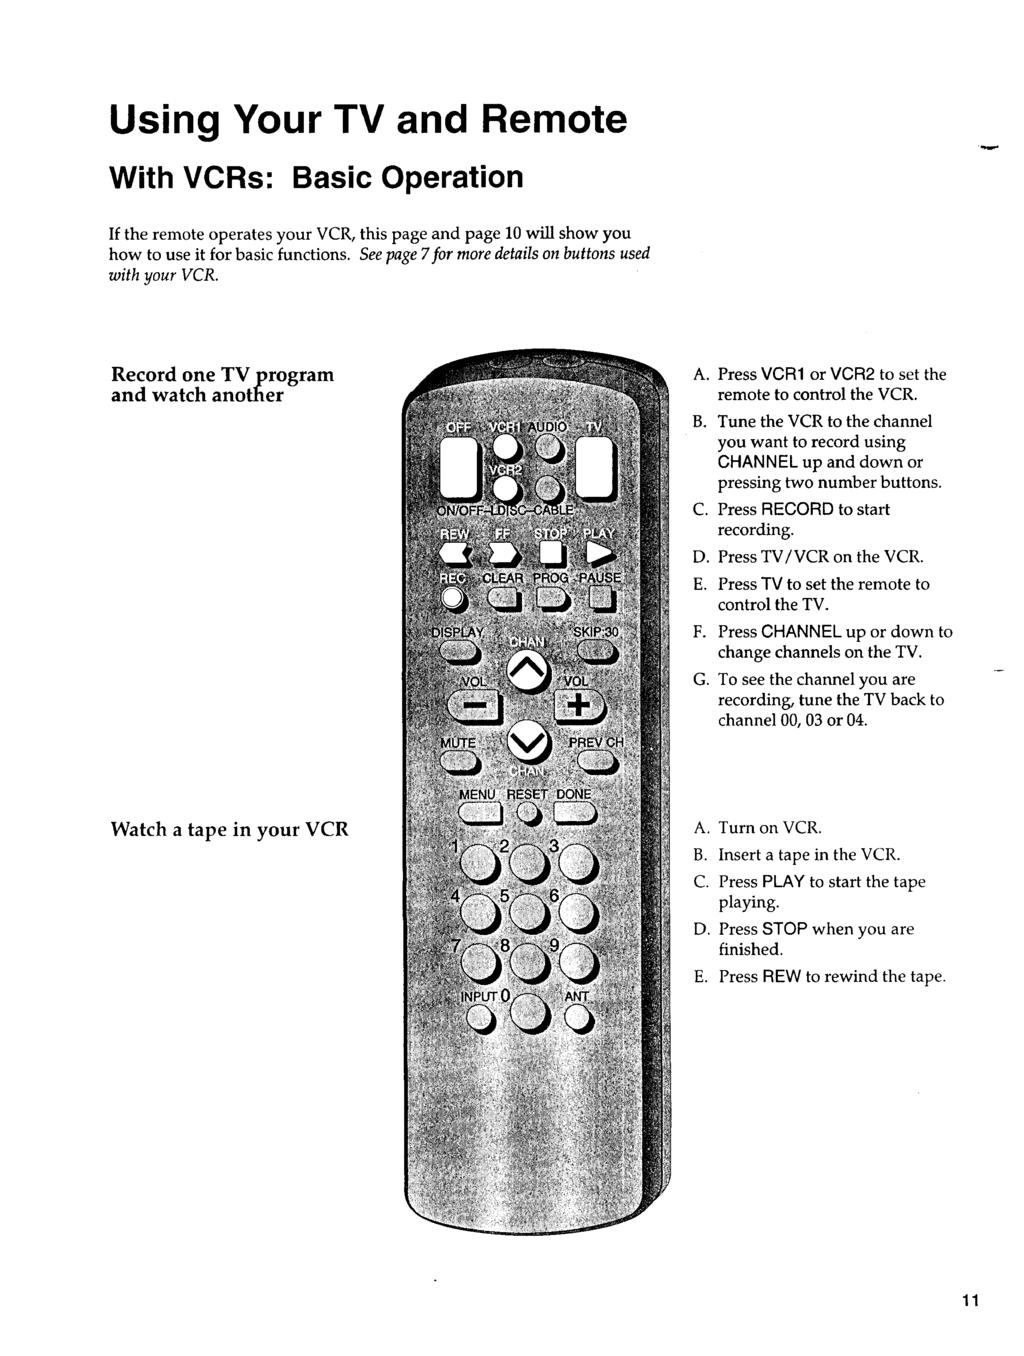 Using Your TV and Remote With VCRs: Basic Operation If the remote operates your VCR, this page and page 10 will show you how to use it for basic functions.